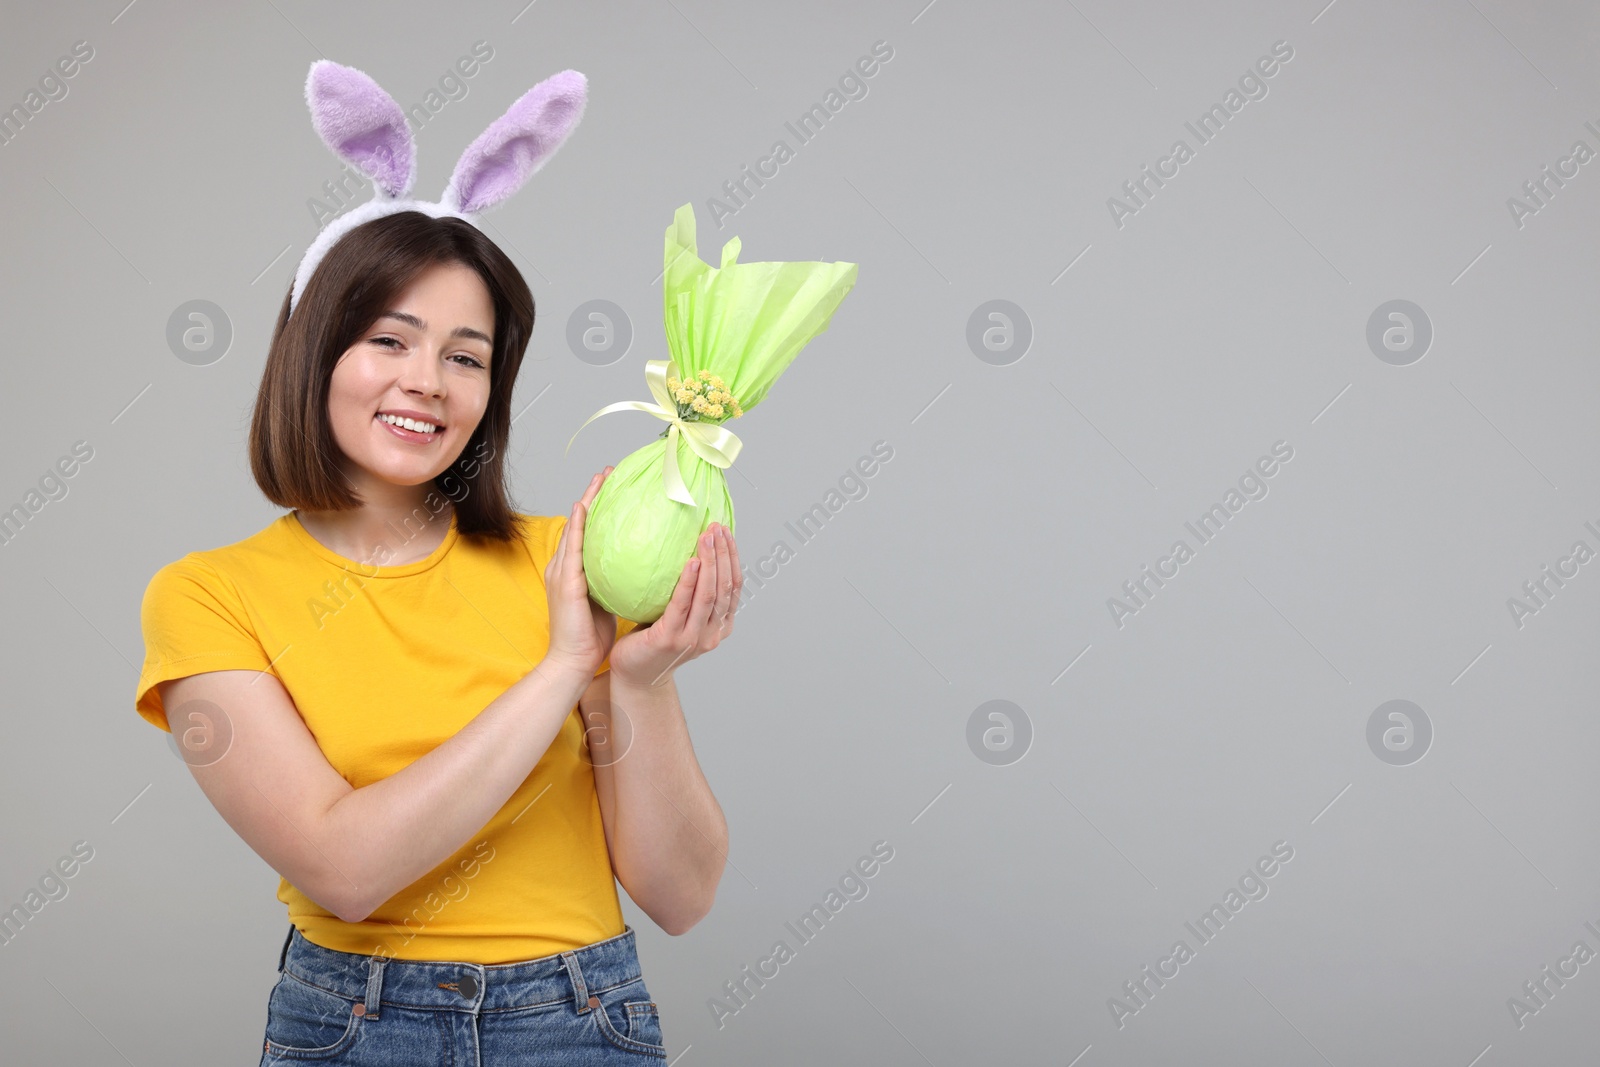 Photo of Easter celebration. Happy woman with bunny ears and wrapped egg on grey background, space for text